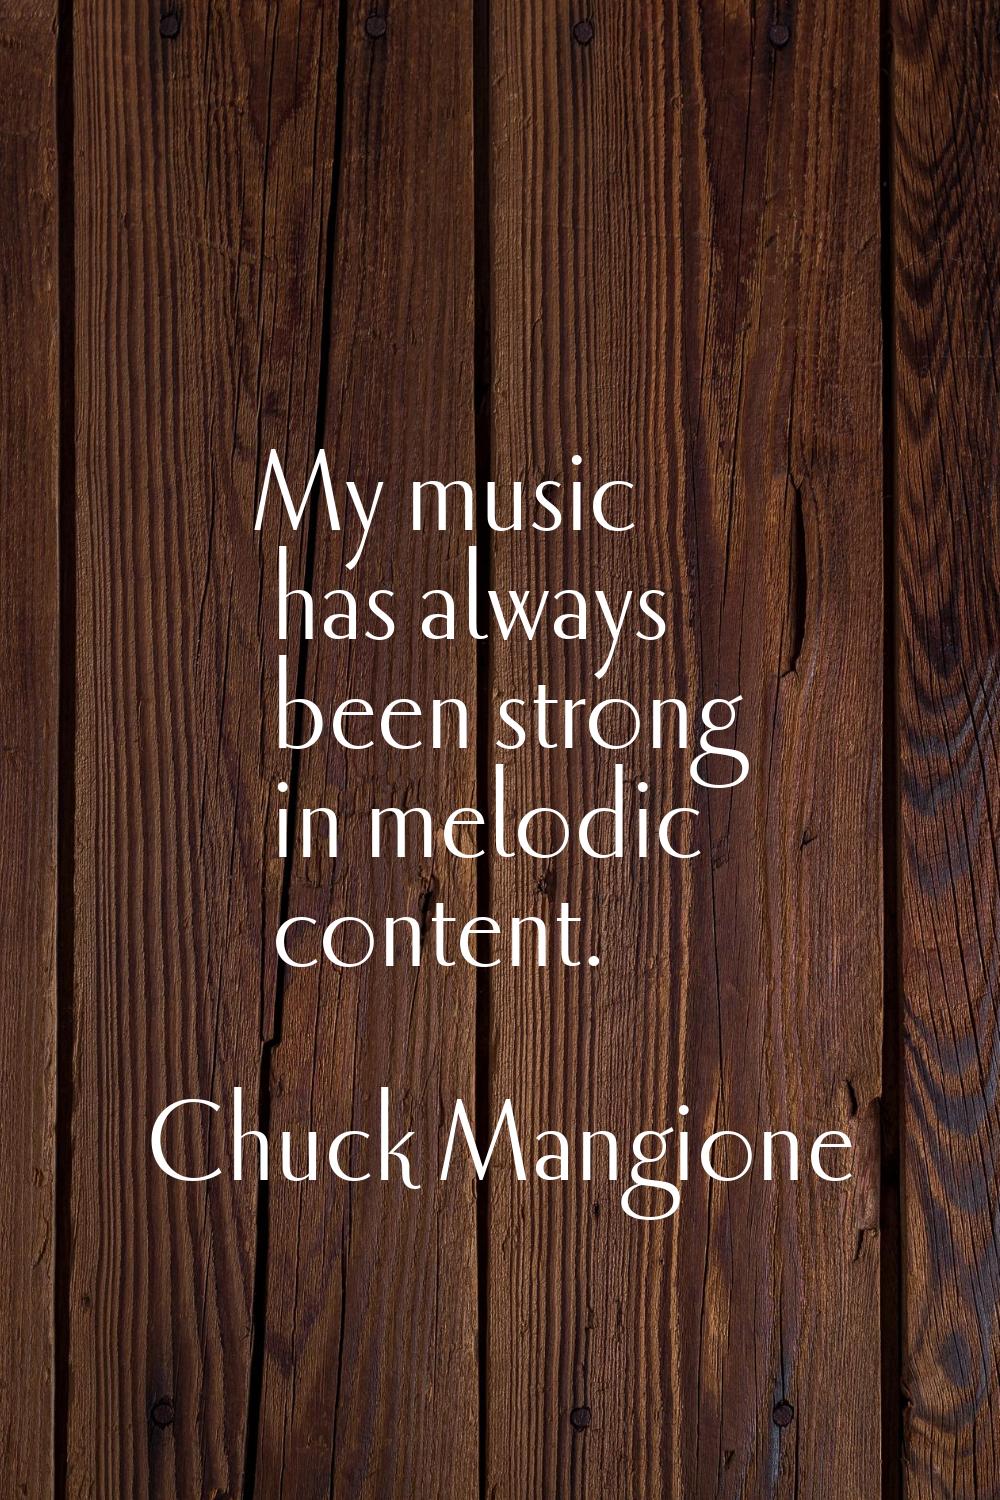 My music has always been strong in melodic content.